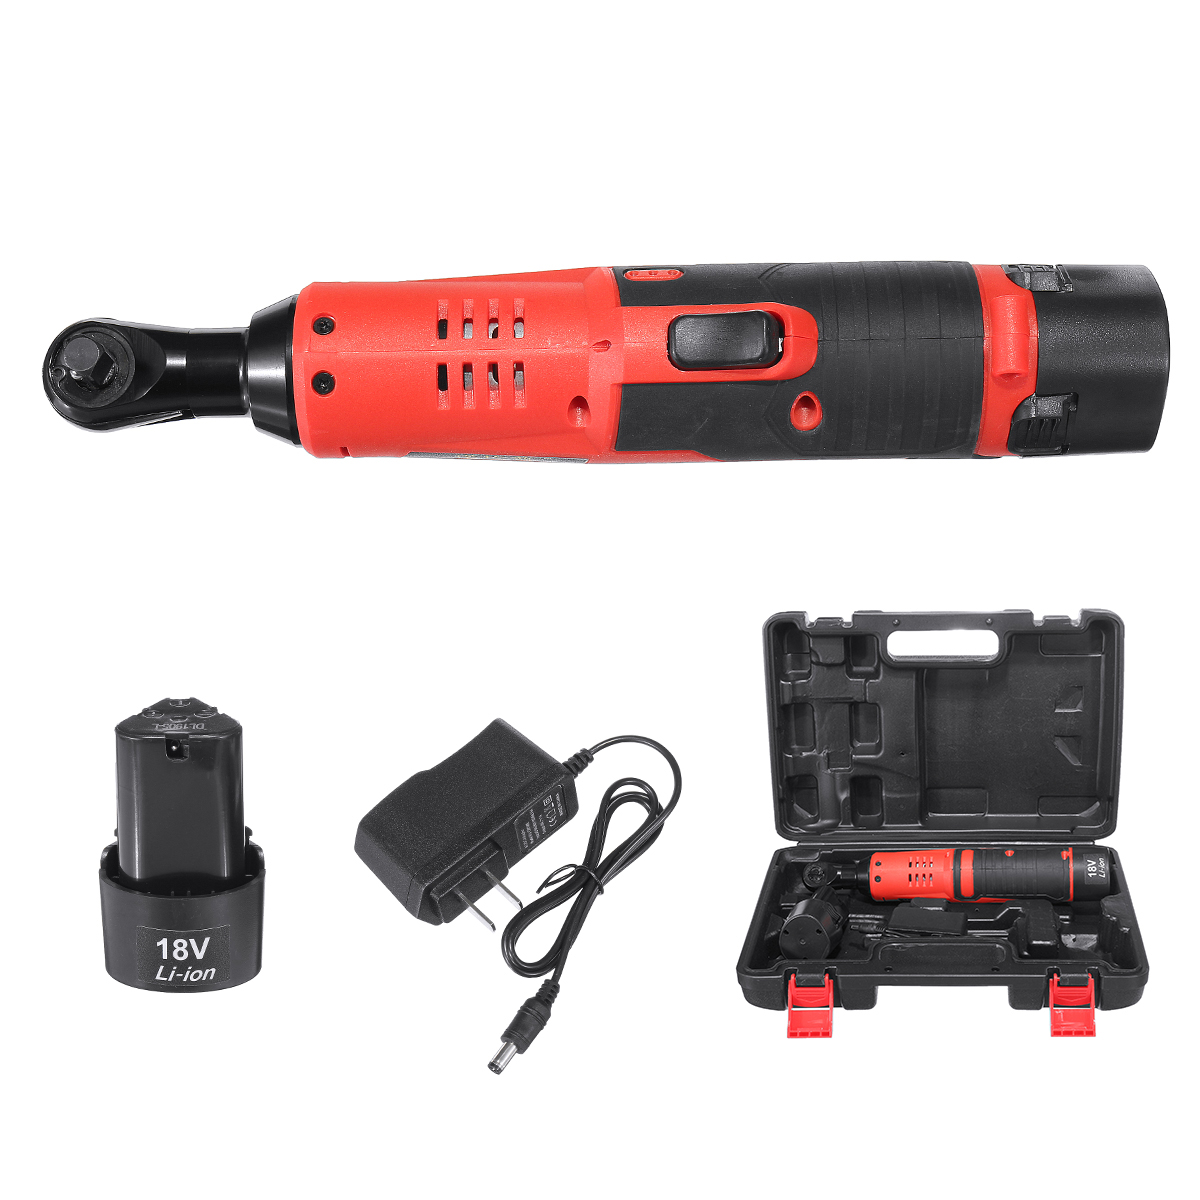 30V18V-2-Li-ion-Battery-Electric-Wrench-Cordless-Right-Ratchet-Angle-Wrench-Power-Tool-1553047-9